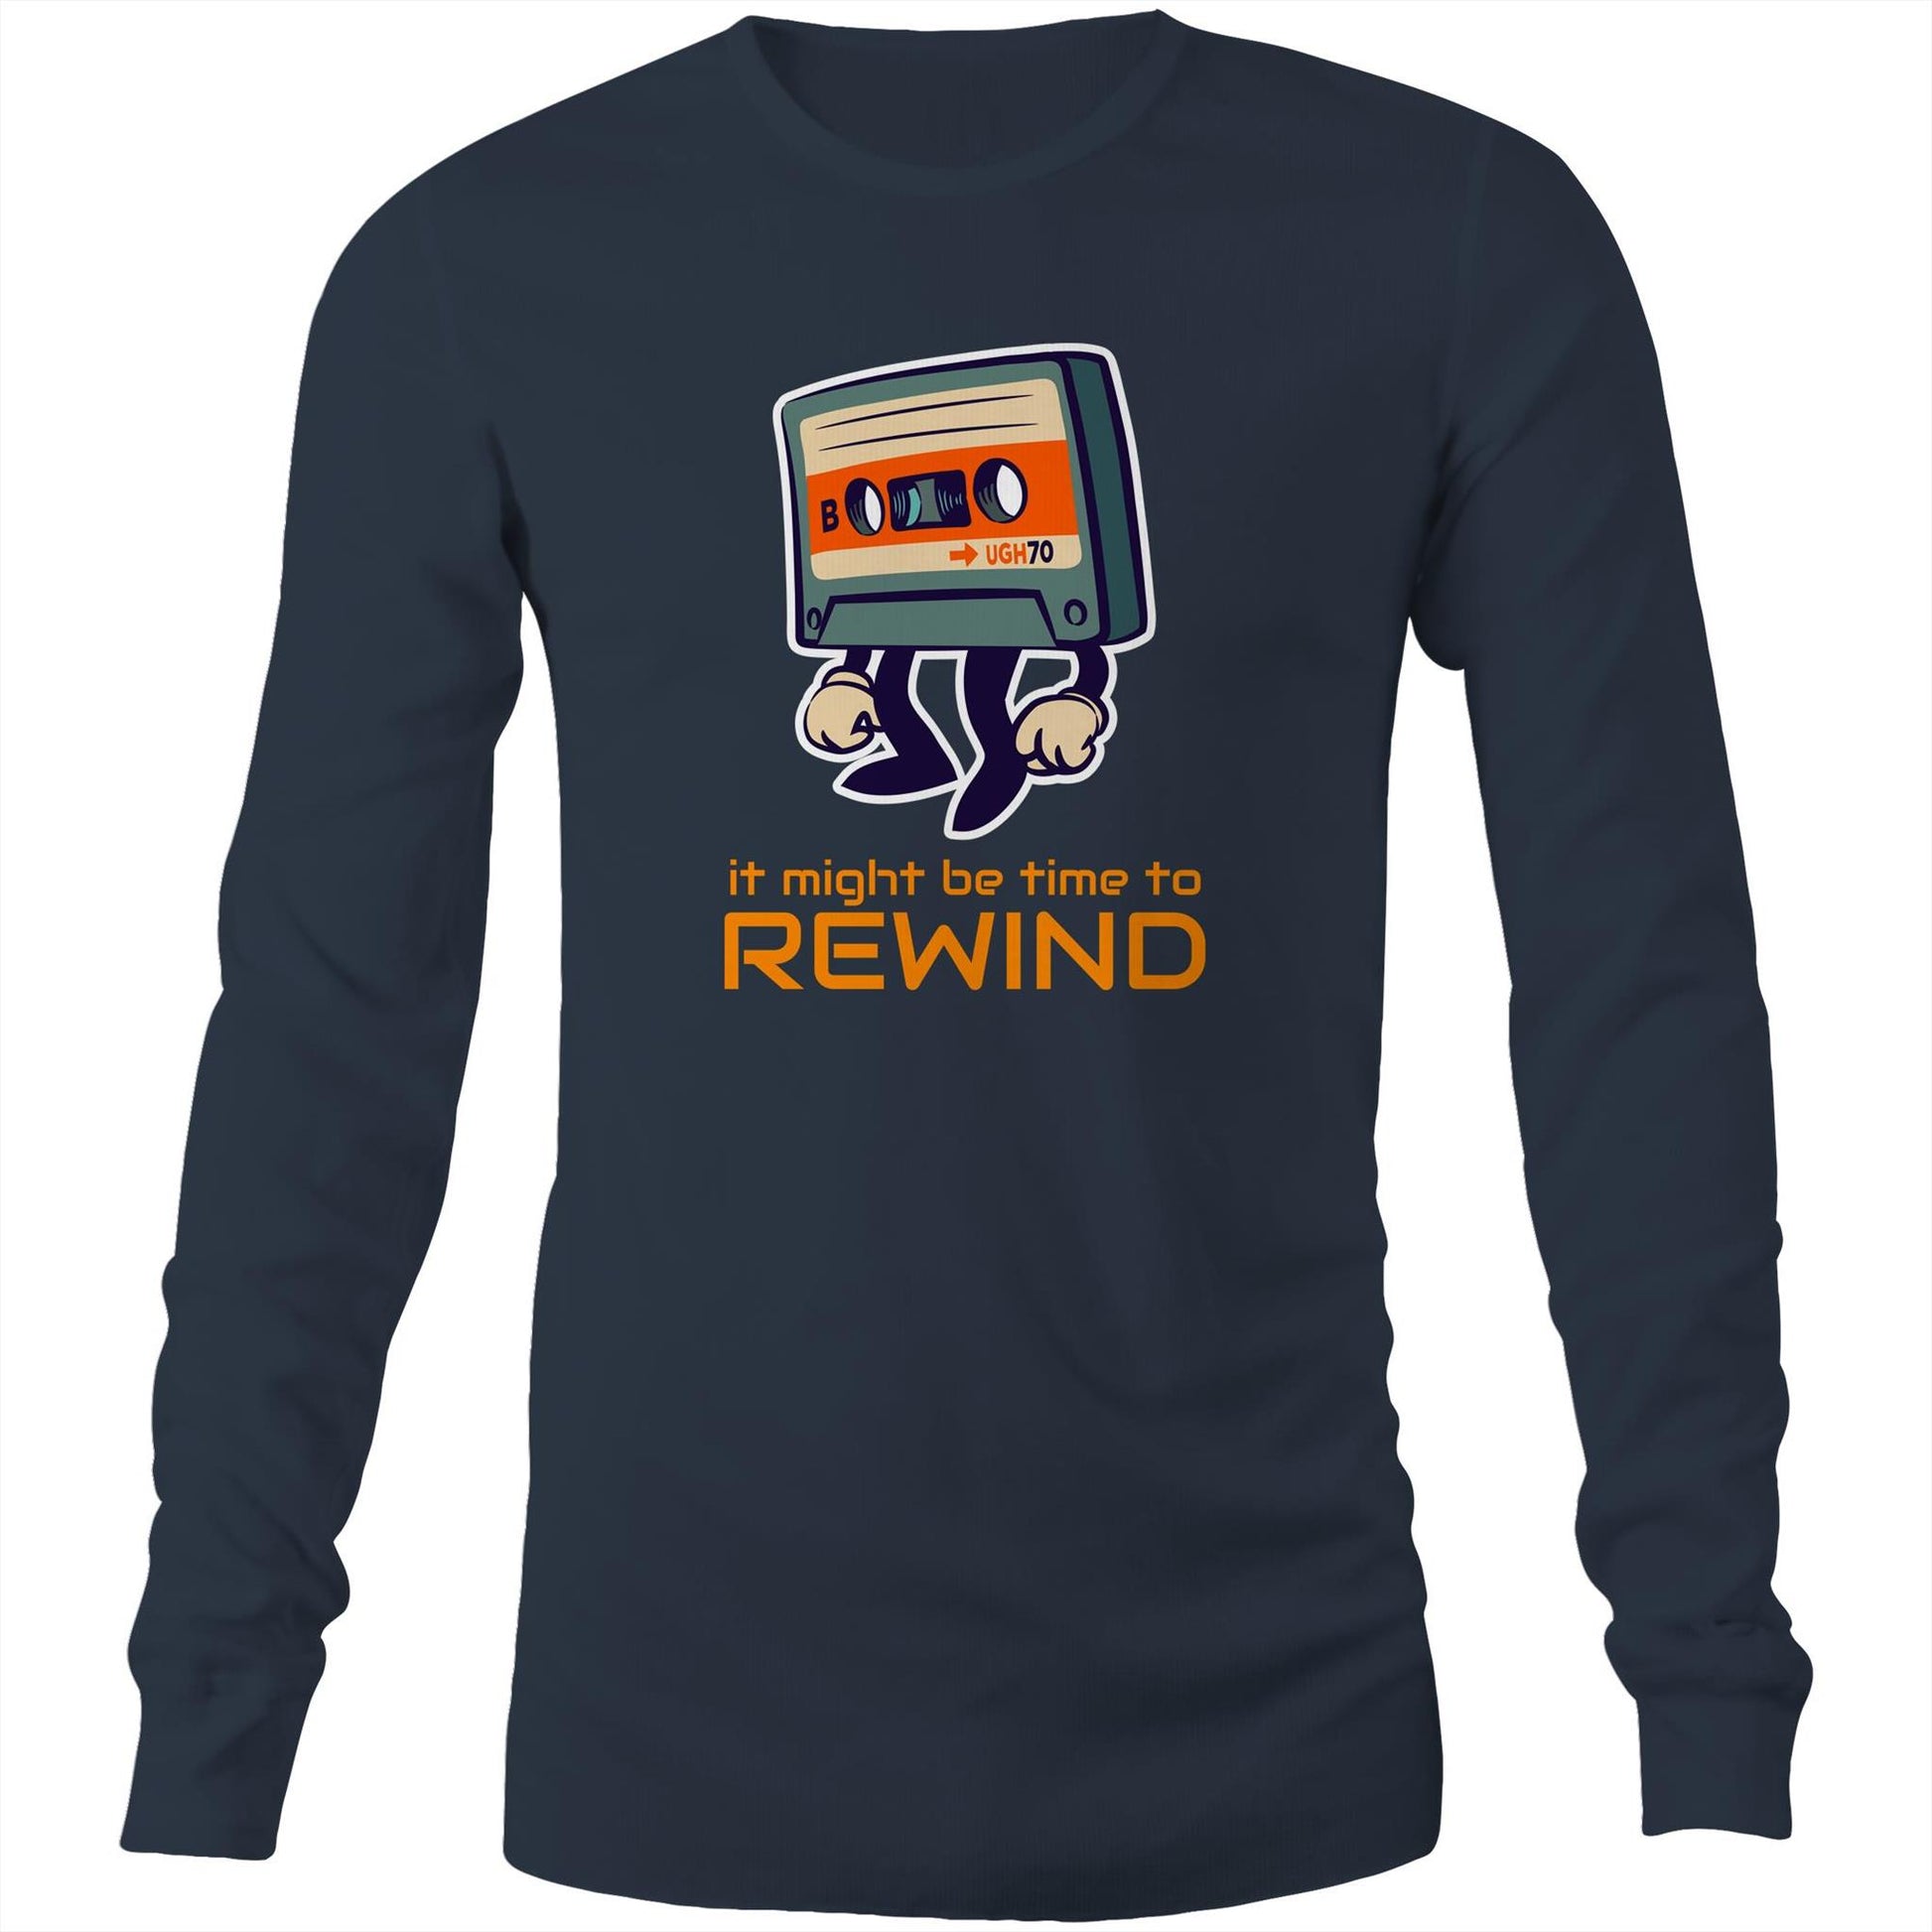 It Might Be Time To Rewind - Long Sleeve T-Shirt Navy Unisex Long Sleeve T-shirt Music Retro